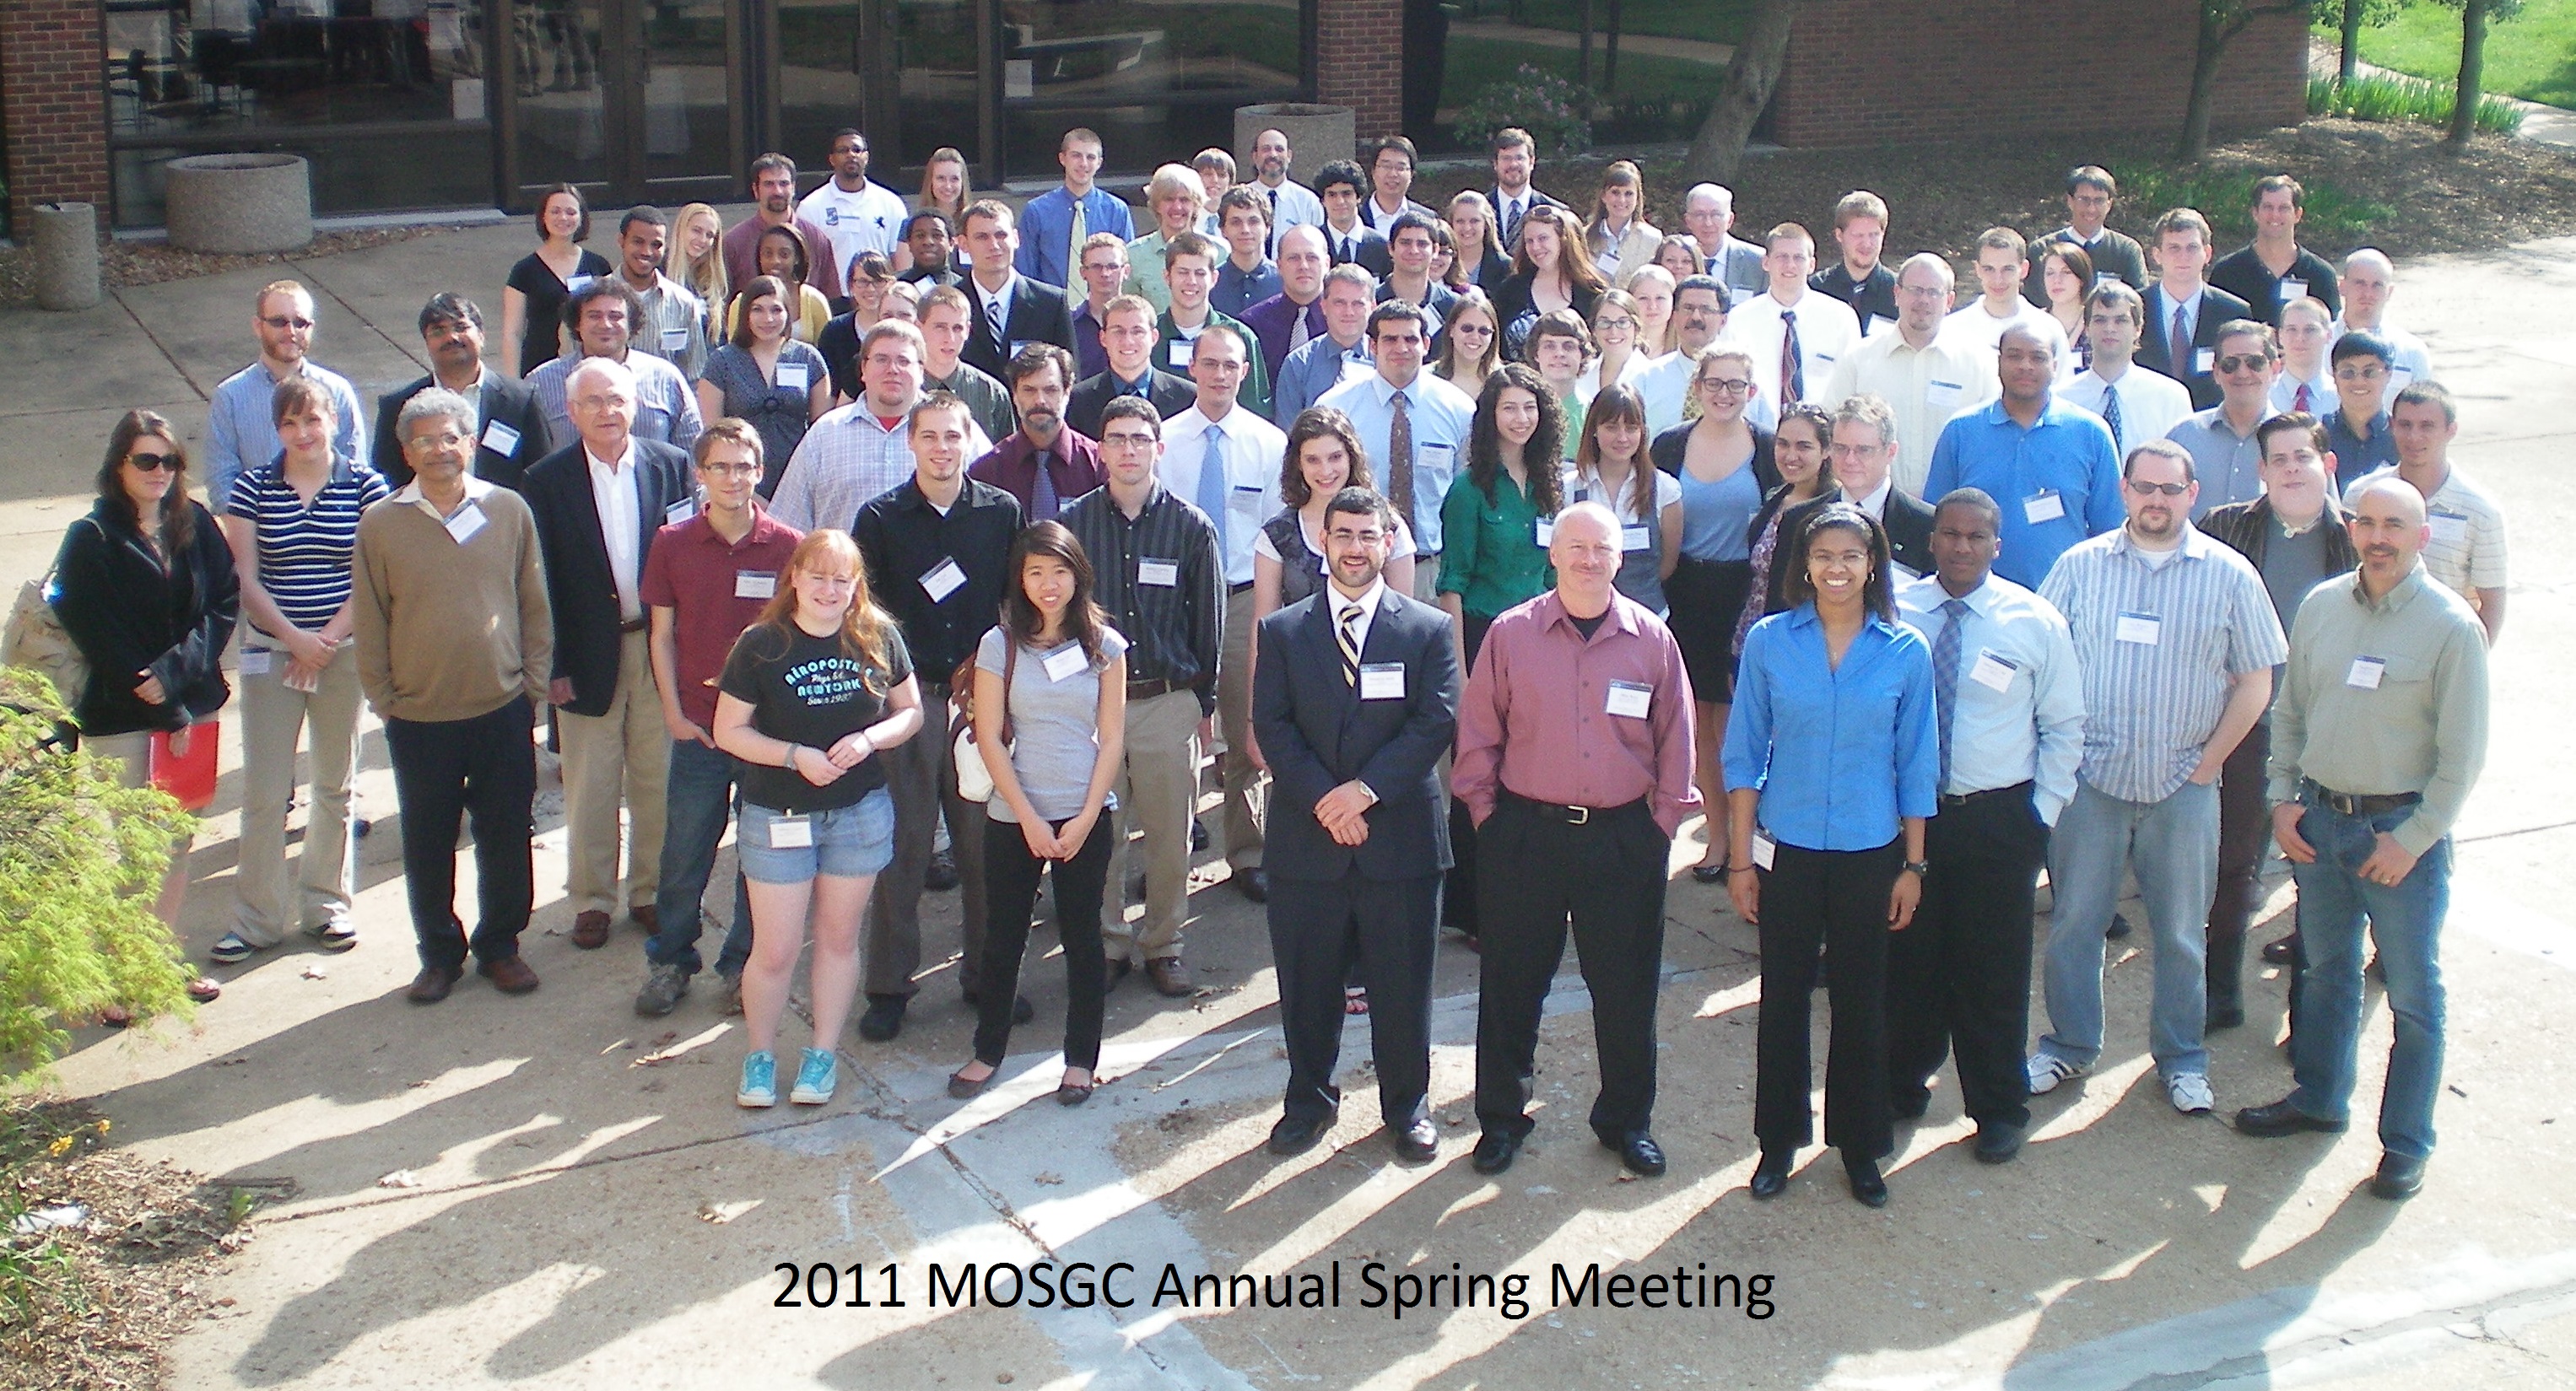 Group Photo of the 2011 MOSGC Annual Spring Meeting